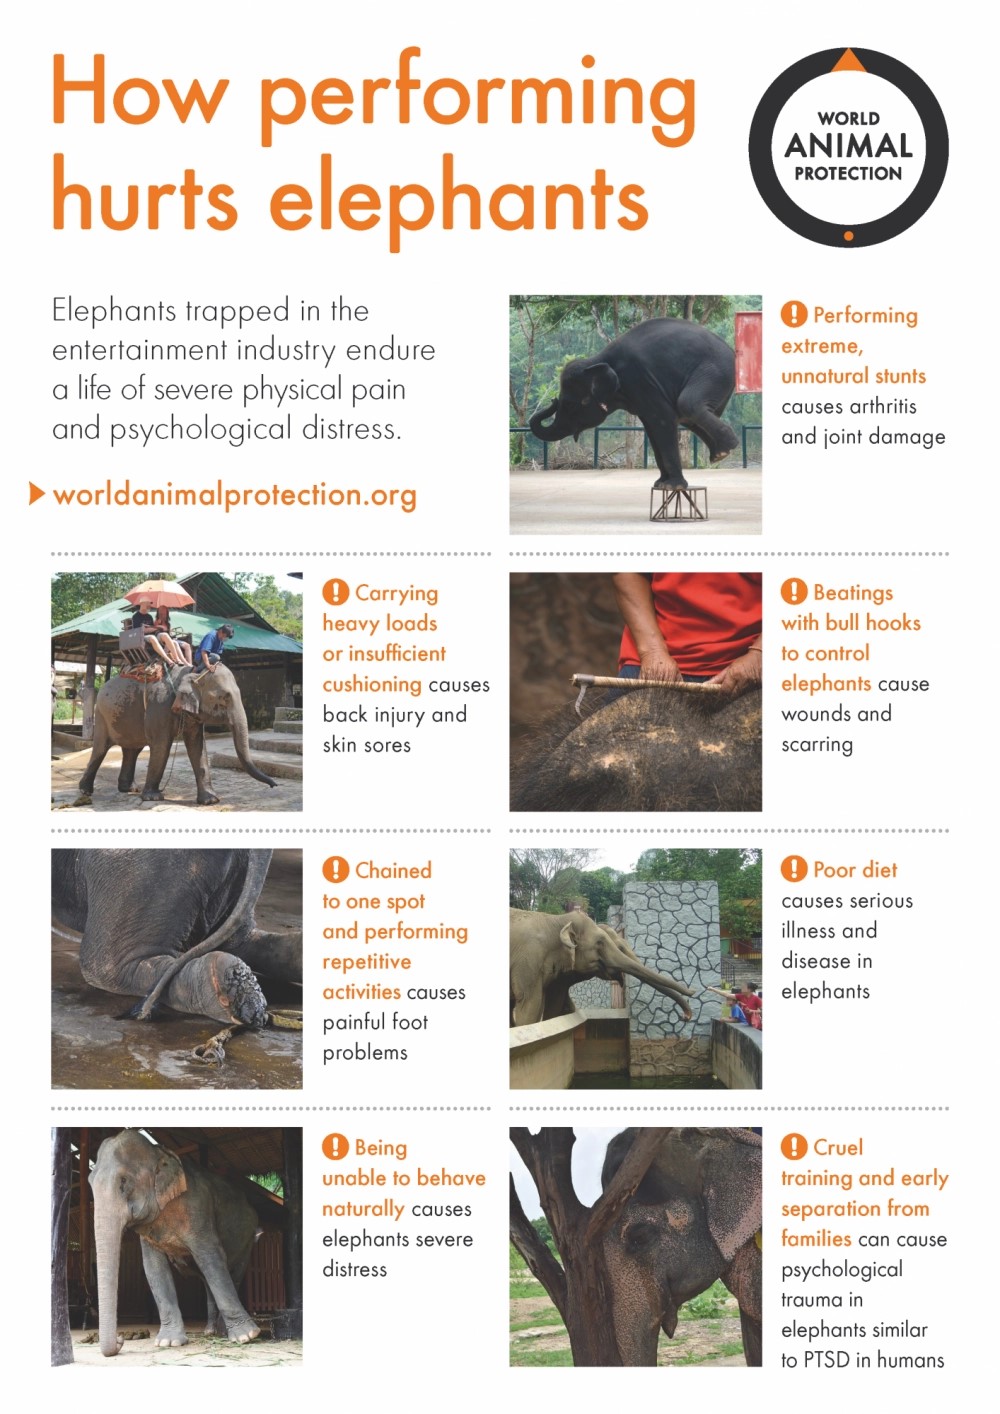 An infographic explaining how performing hurts elephants